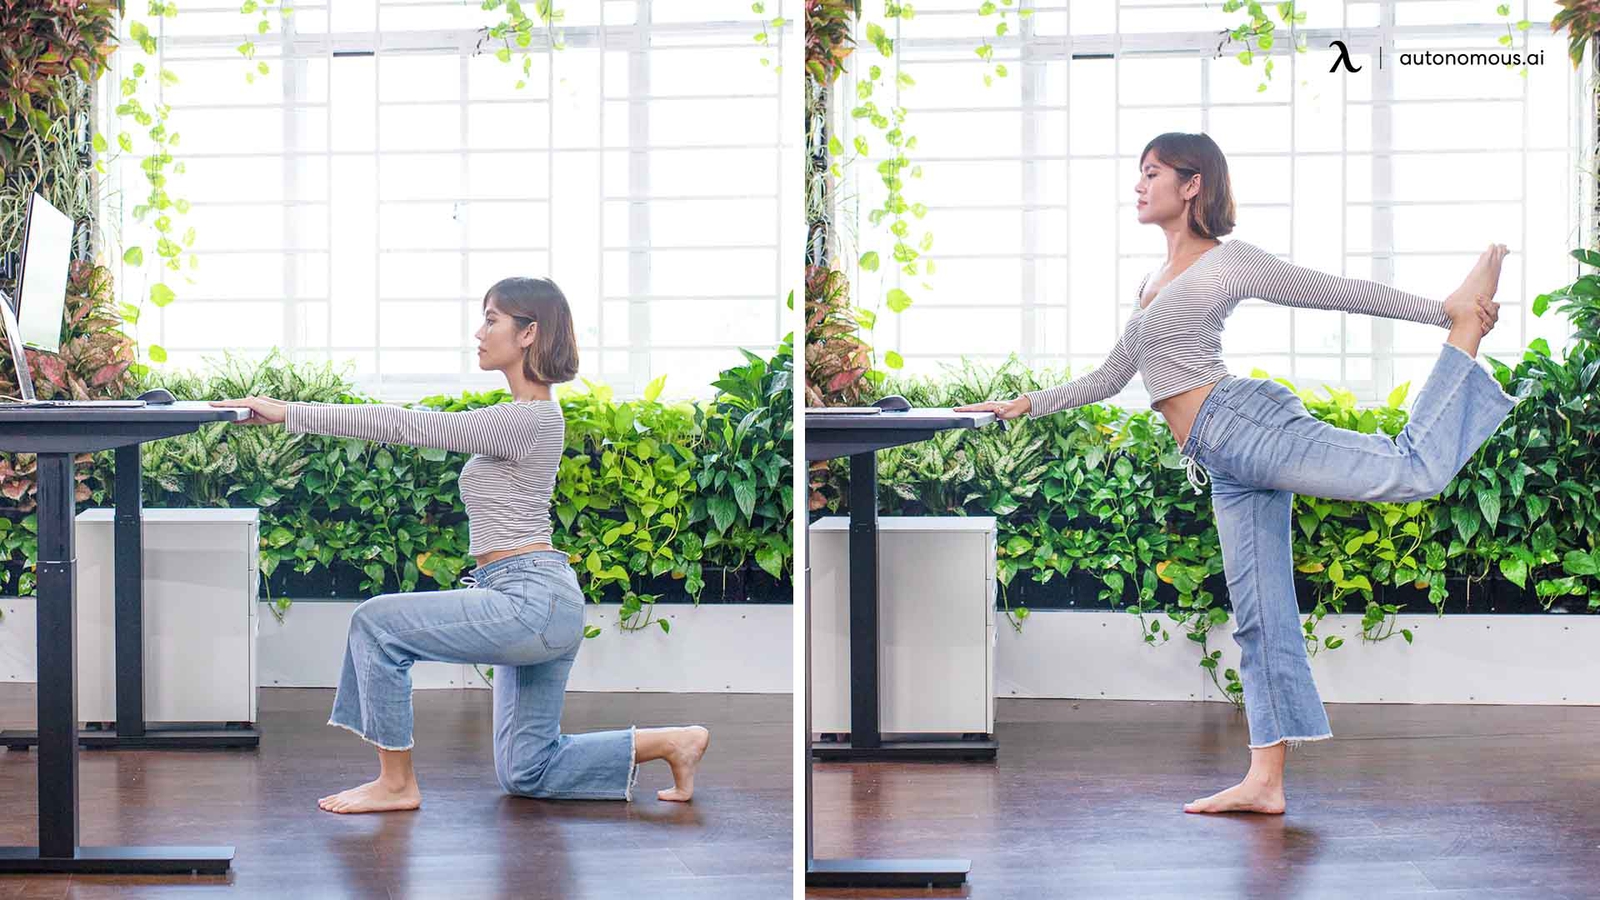 7 Lower Back Stretches that Work for Office Workers